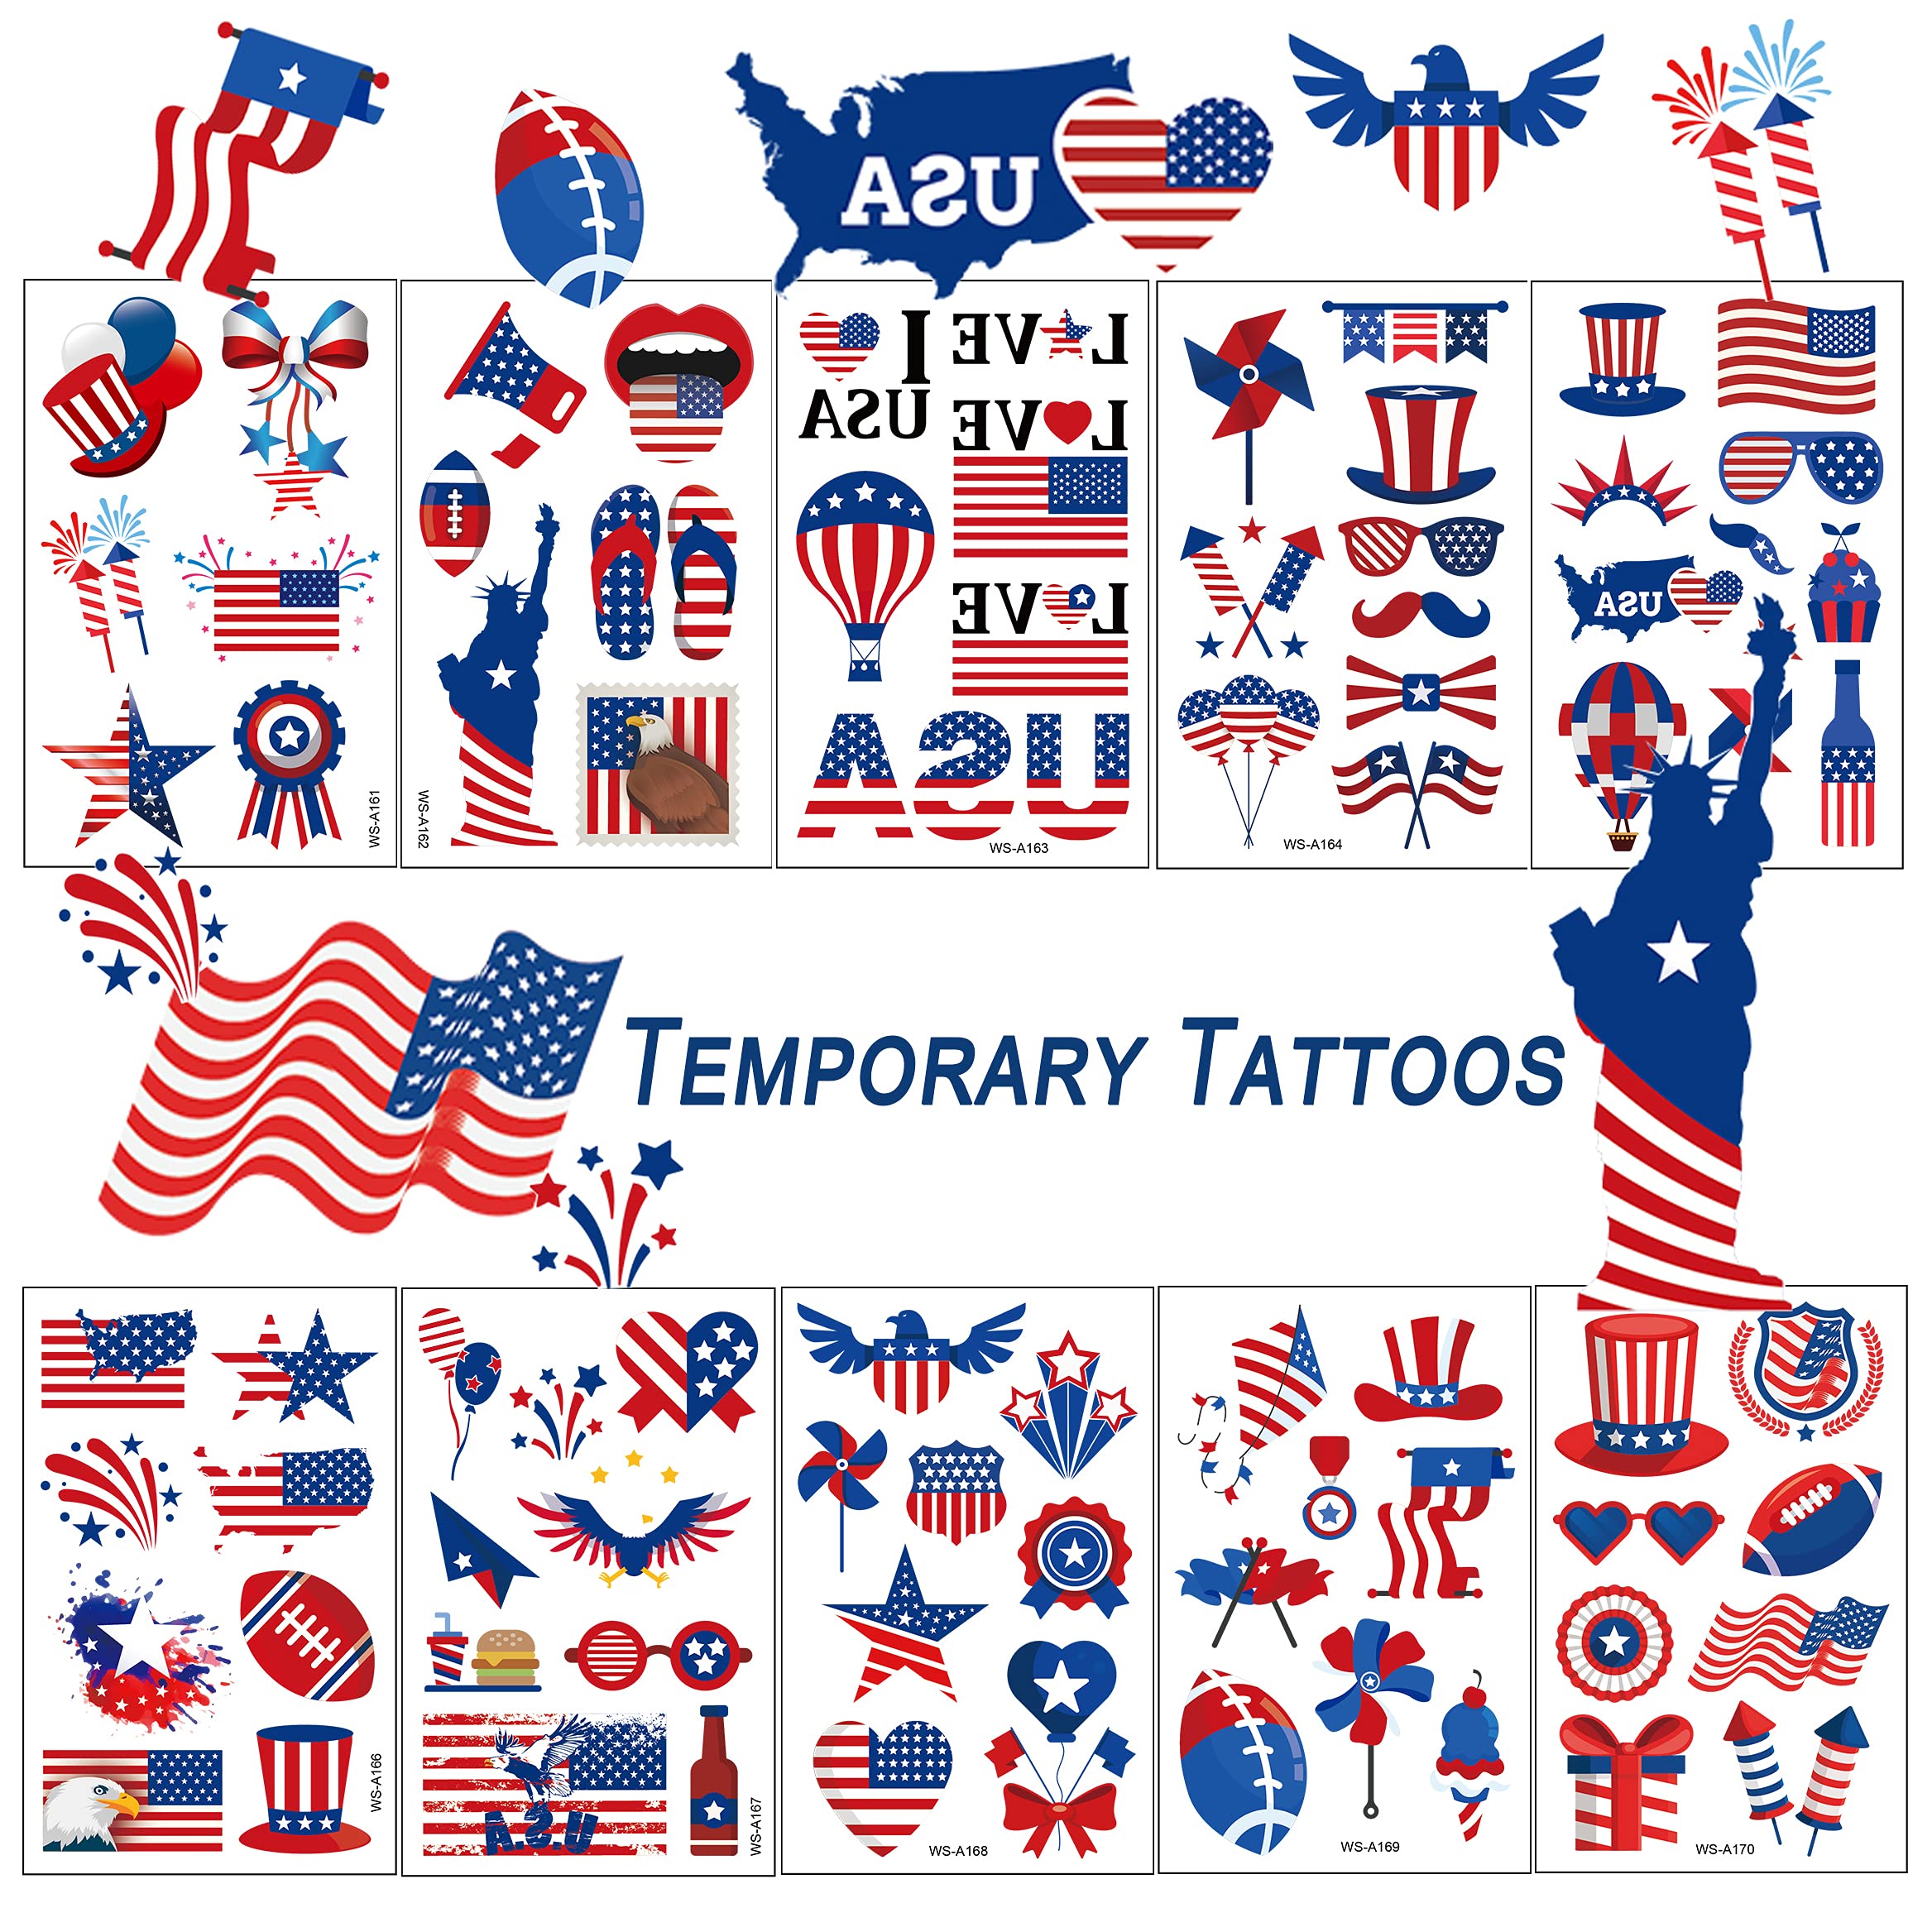 TopFunny Temporary Tattoos 90Pcs Independence Day Tattoos (10 Sheets) American Flag Red White & Blue Design USA Body Art Patriotic Stickers for Labor Day Memorial Day Decoration Party Supplies Flags USA Flag